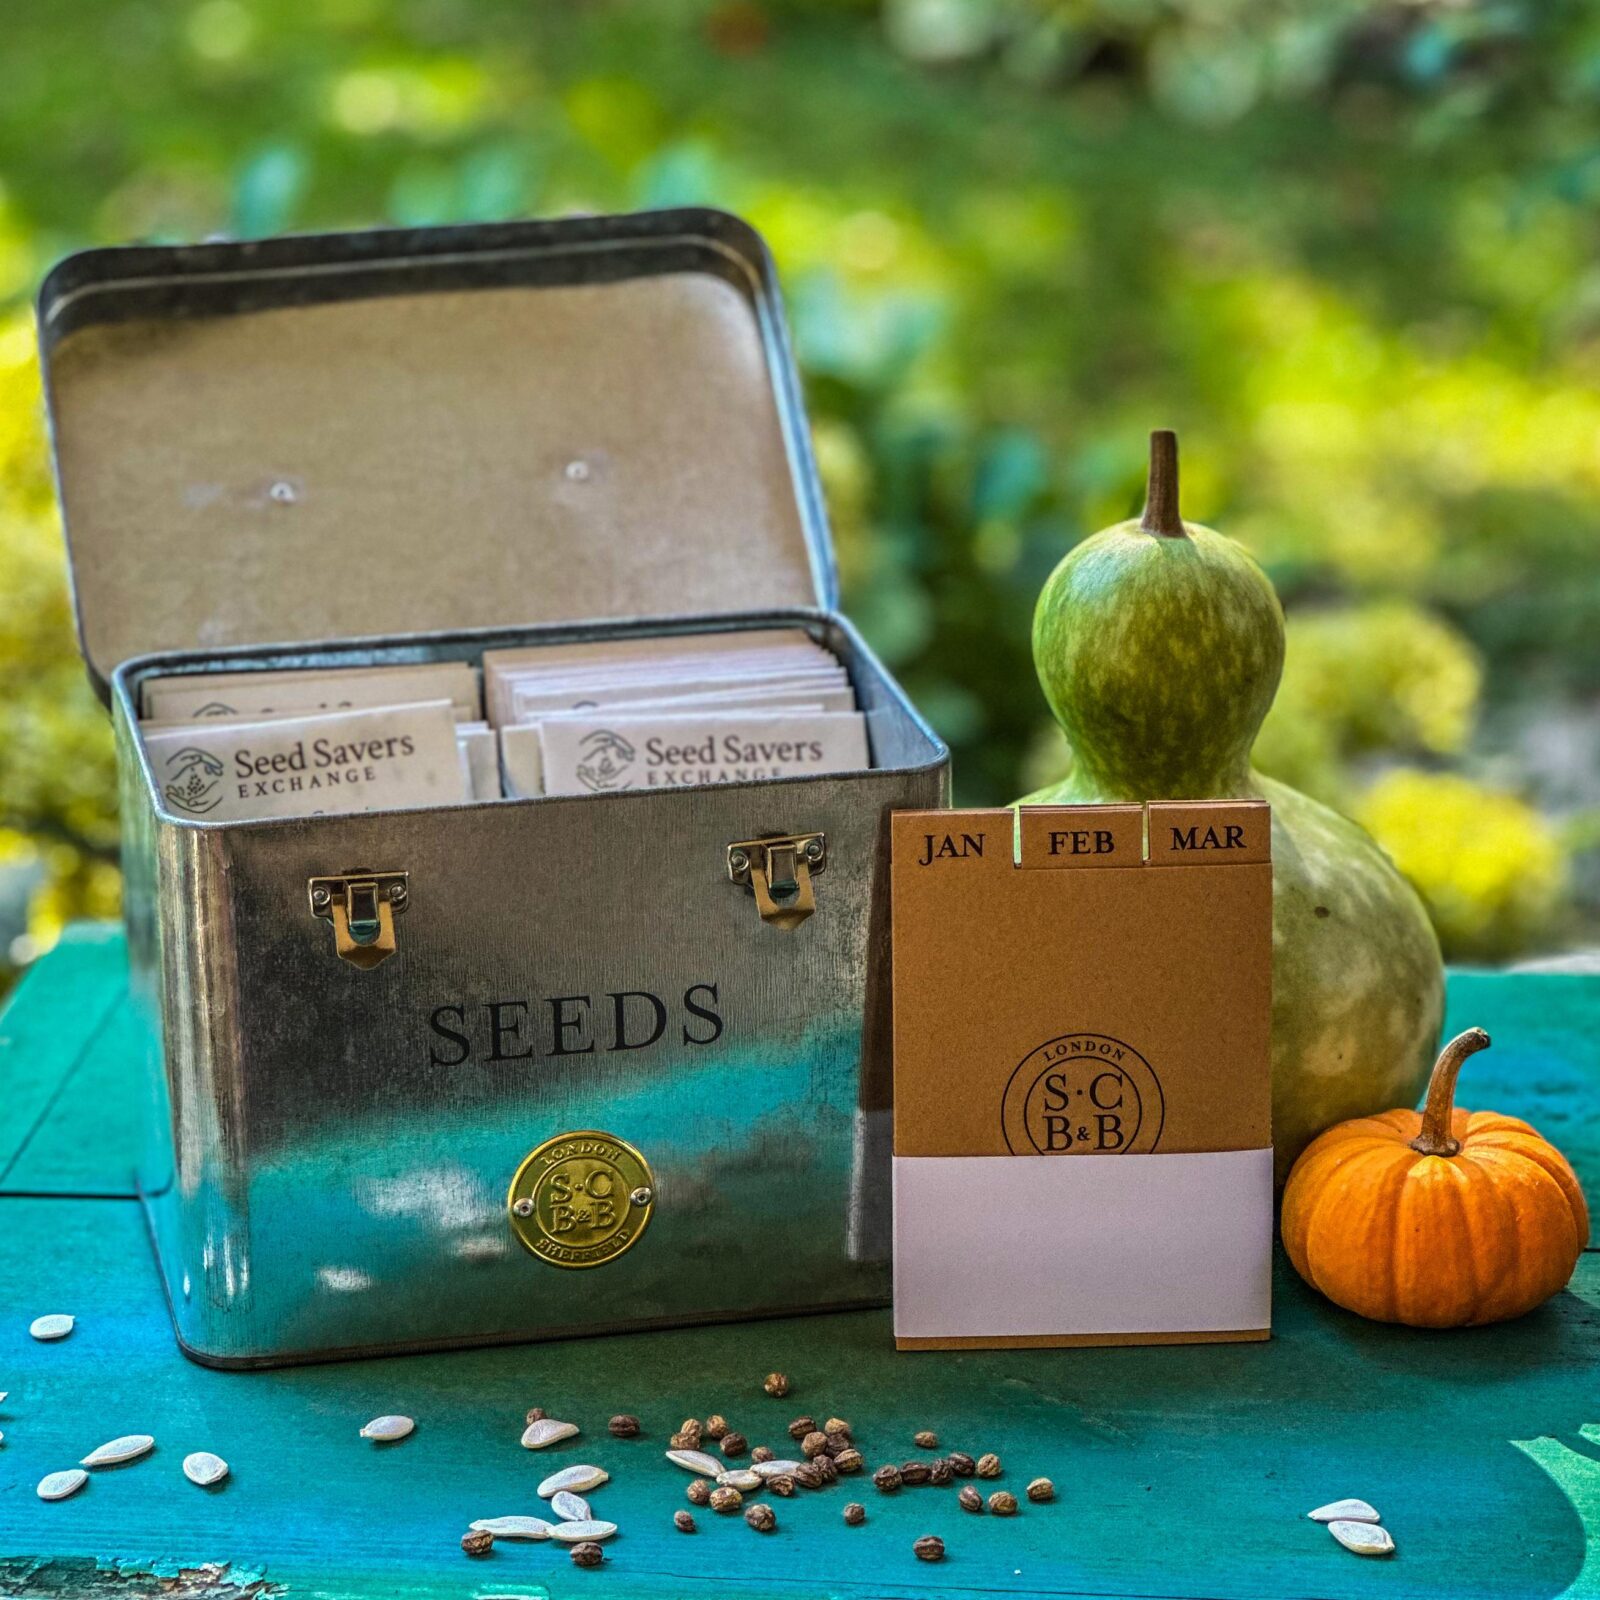 A metal storage tin holding seed packets sits outdoors on a blue tablecloth next to a small calendar, a green gourd, and small pumpkins. Various seeds are scattered on the table.